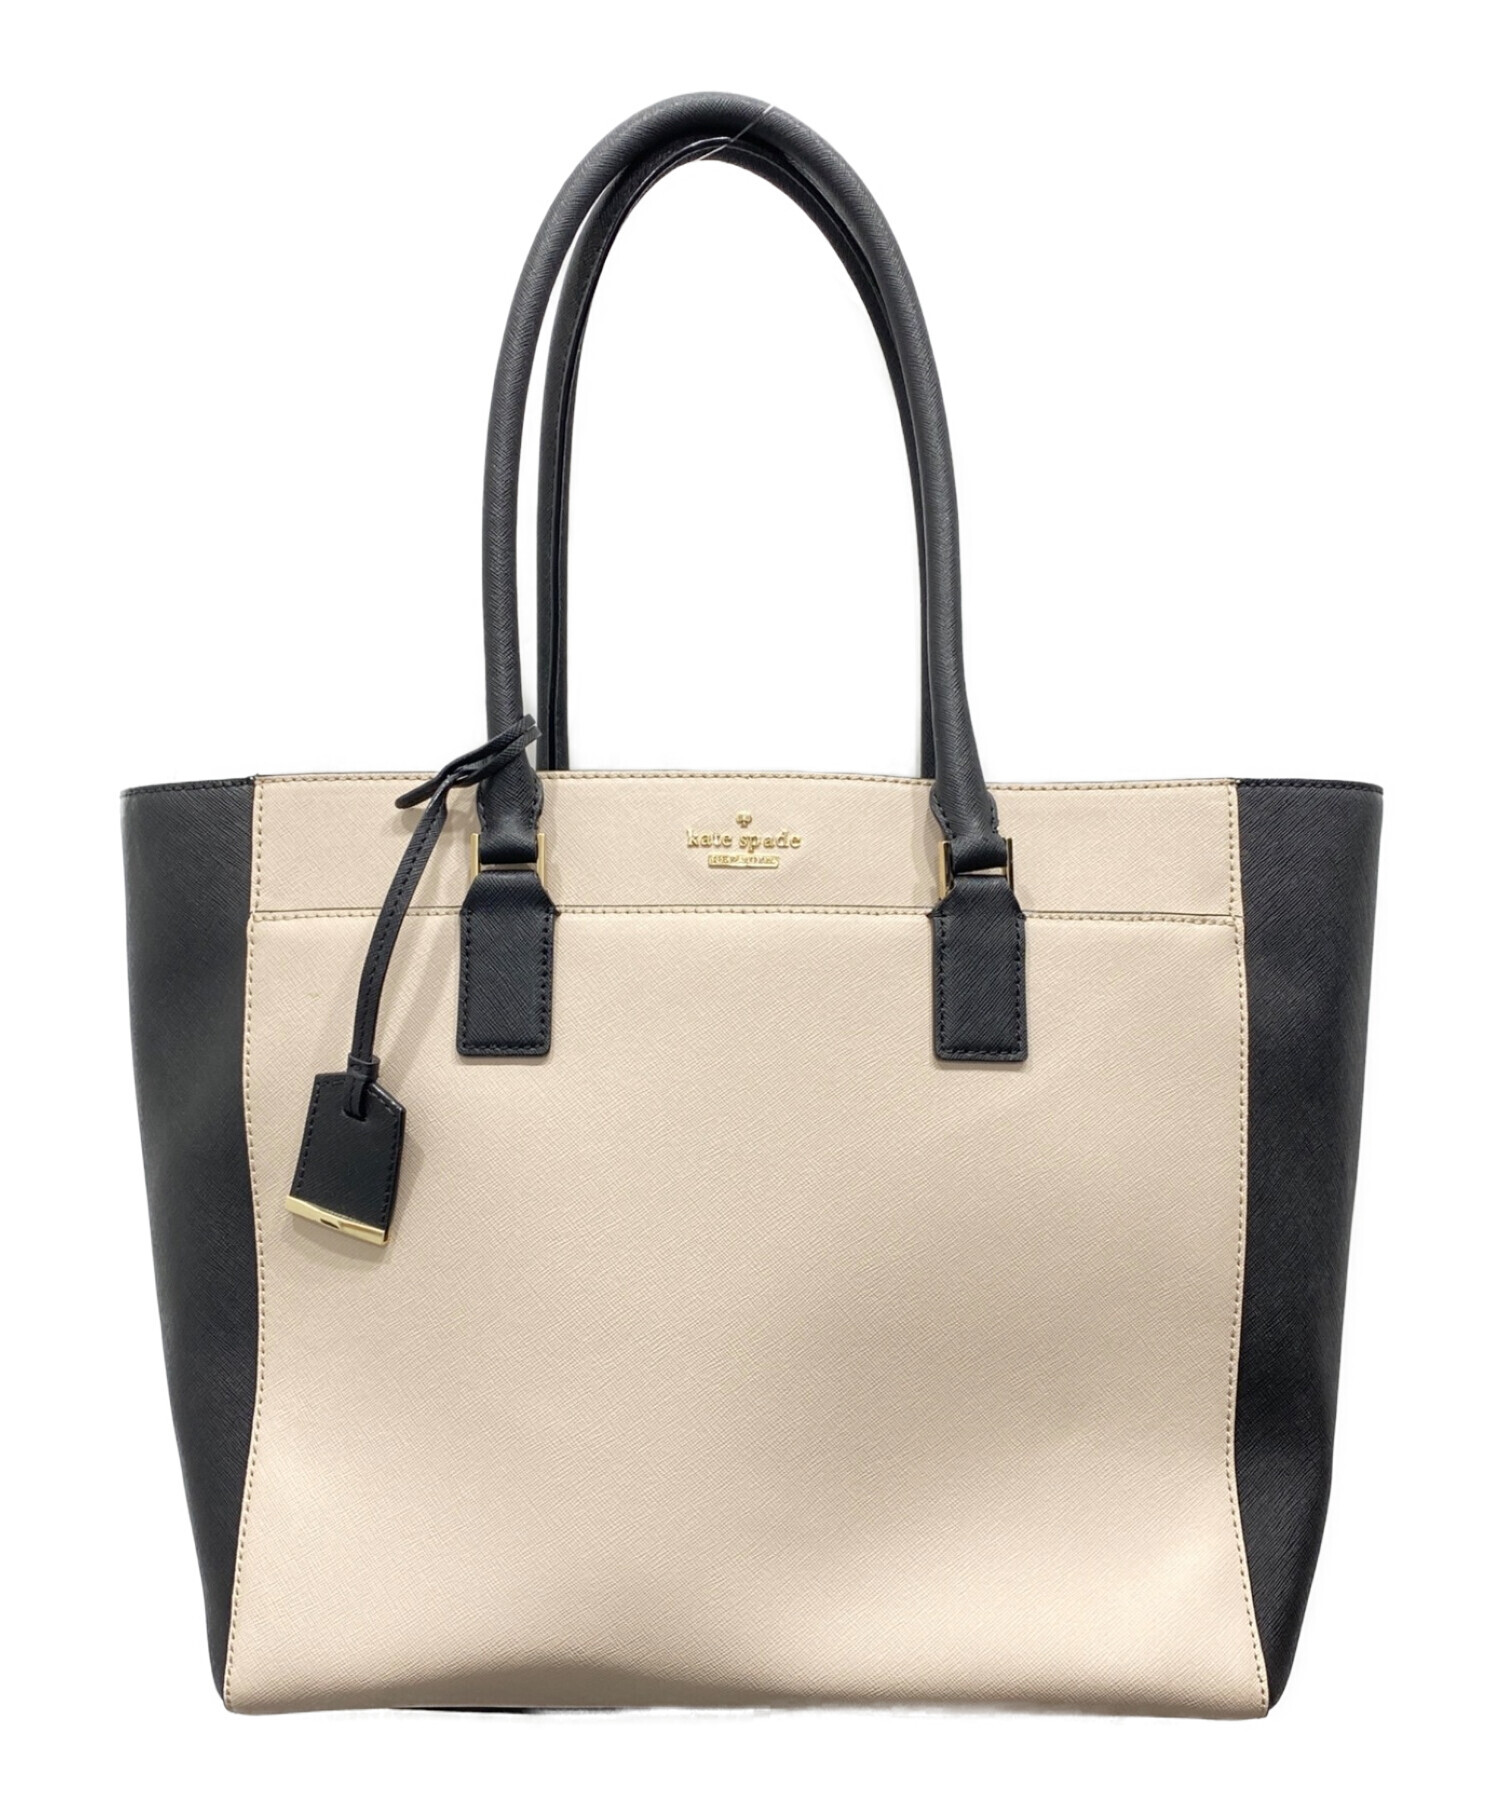 kate spade　バイカラーバッグ